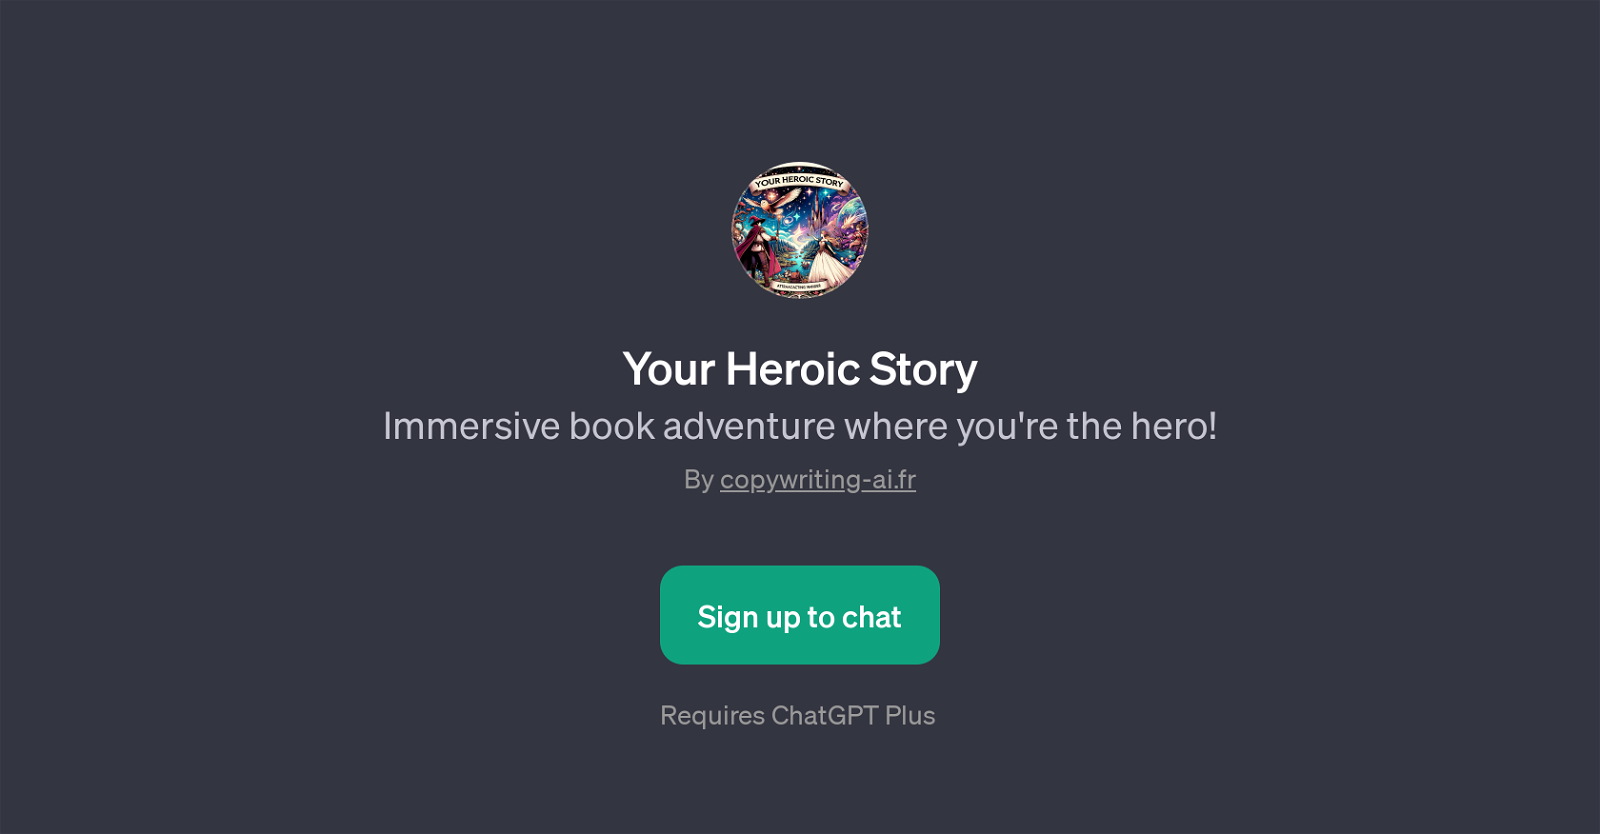 Your Heroic Story website